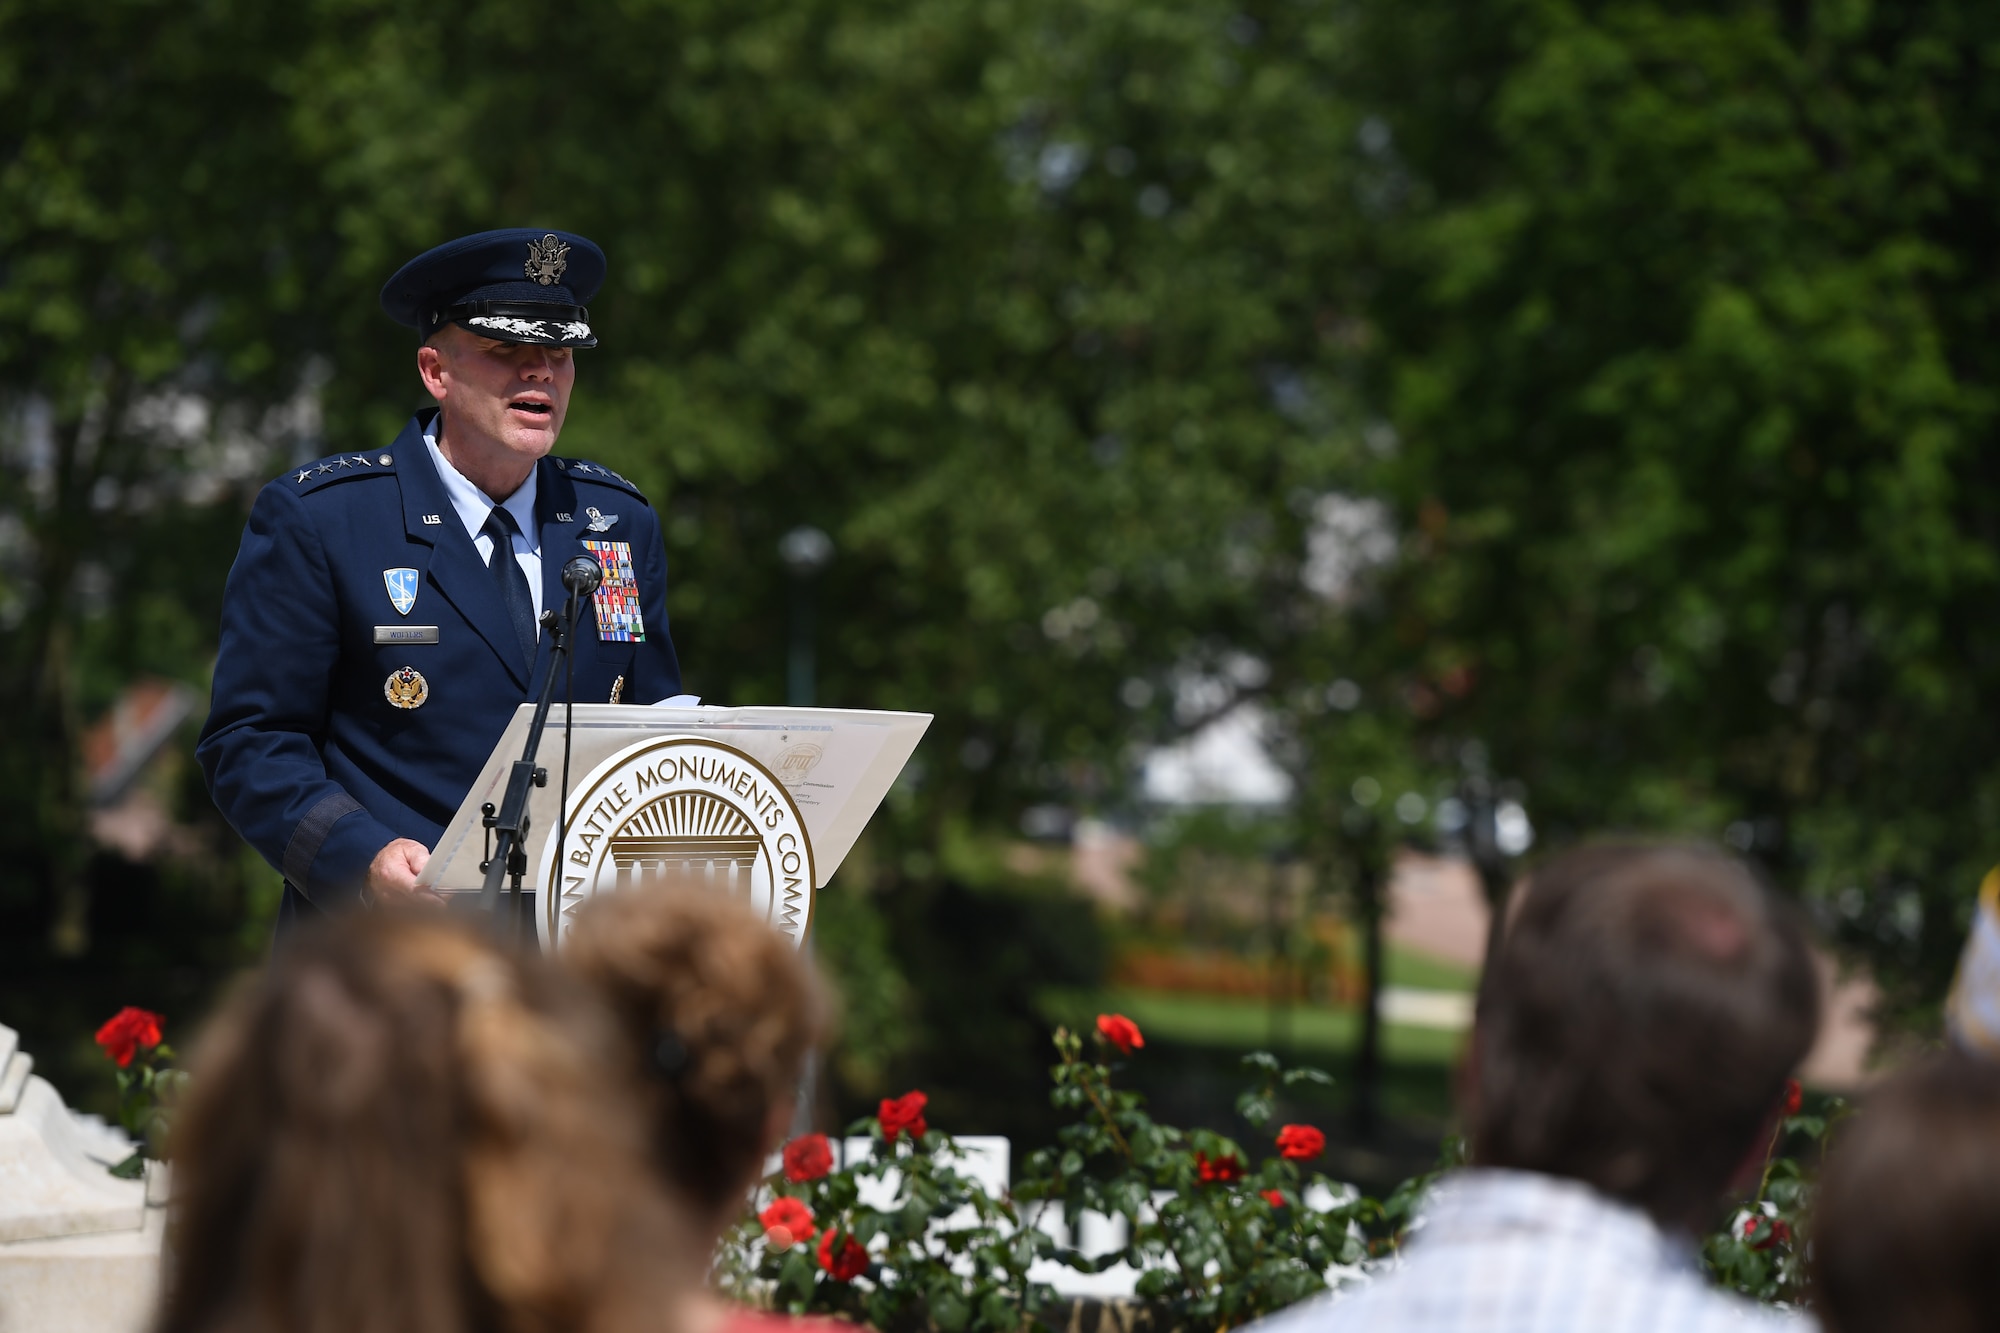 Gen. Wolters gives remarks during a ceremony at Suresnes American Cemetery in France.